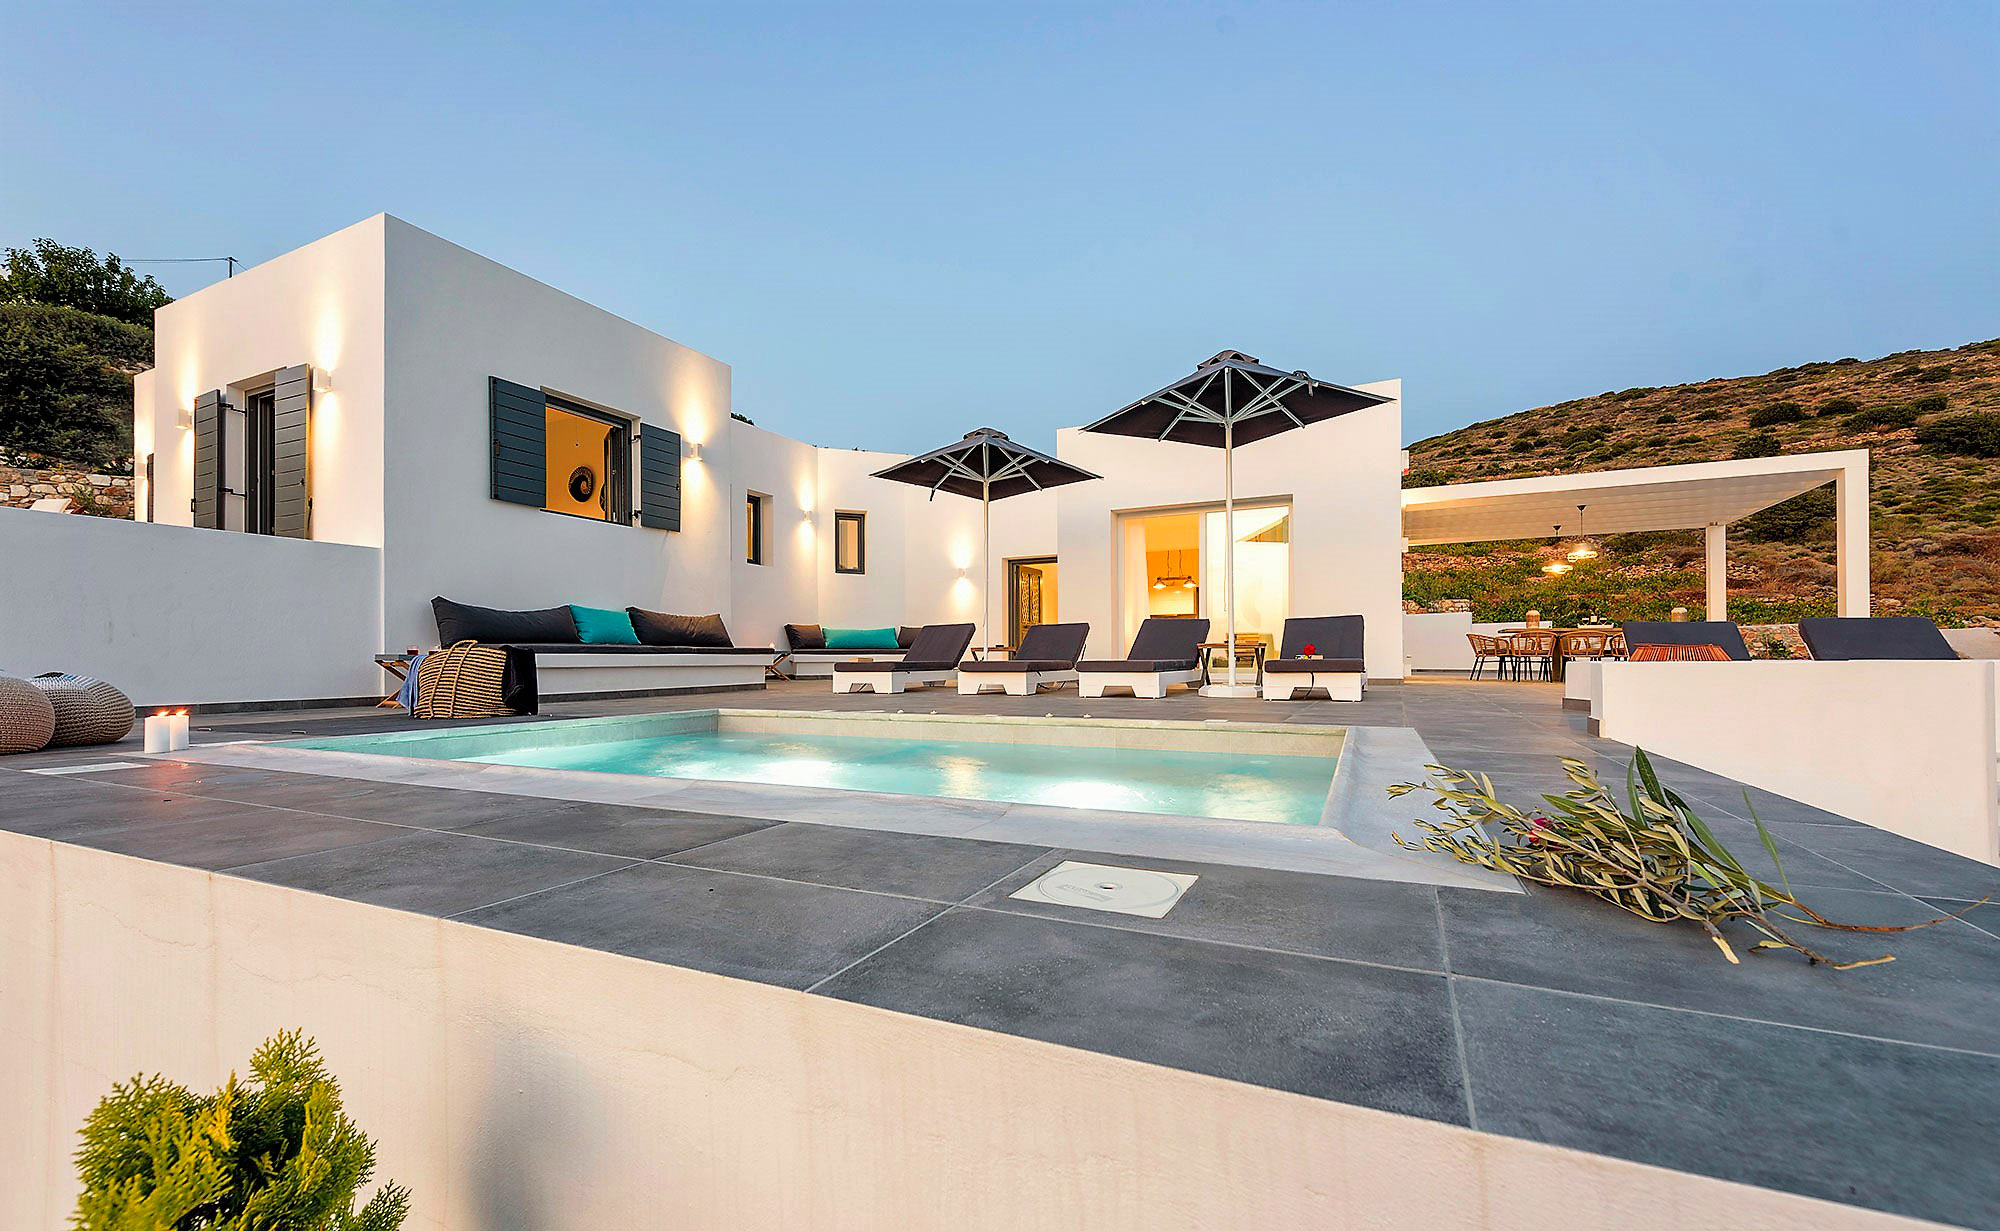 <p>Lovelydays Luxury Rentals introduce you pictures of a charming house in the heart of Paros</p>